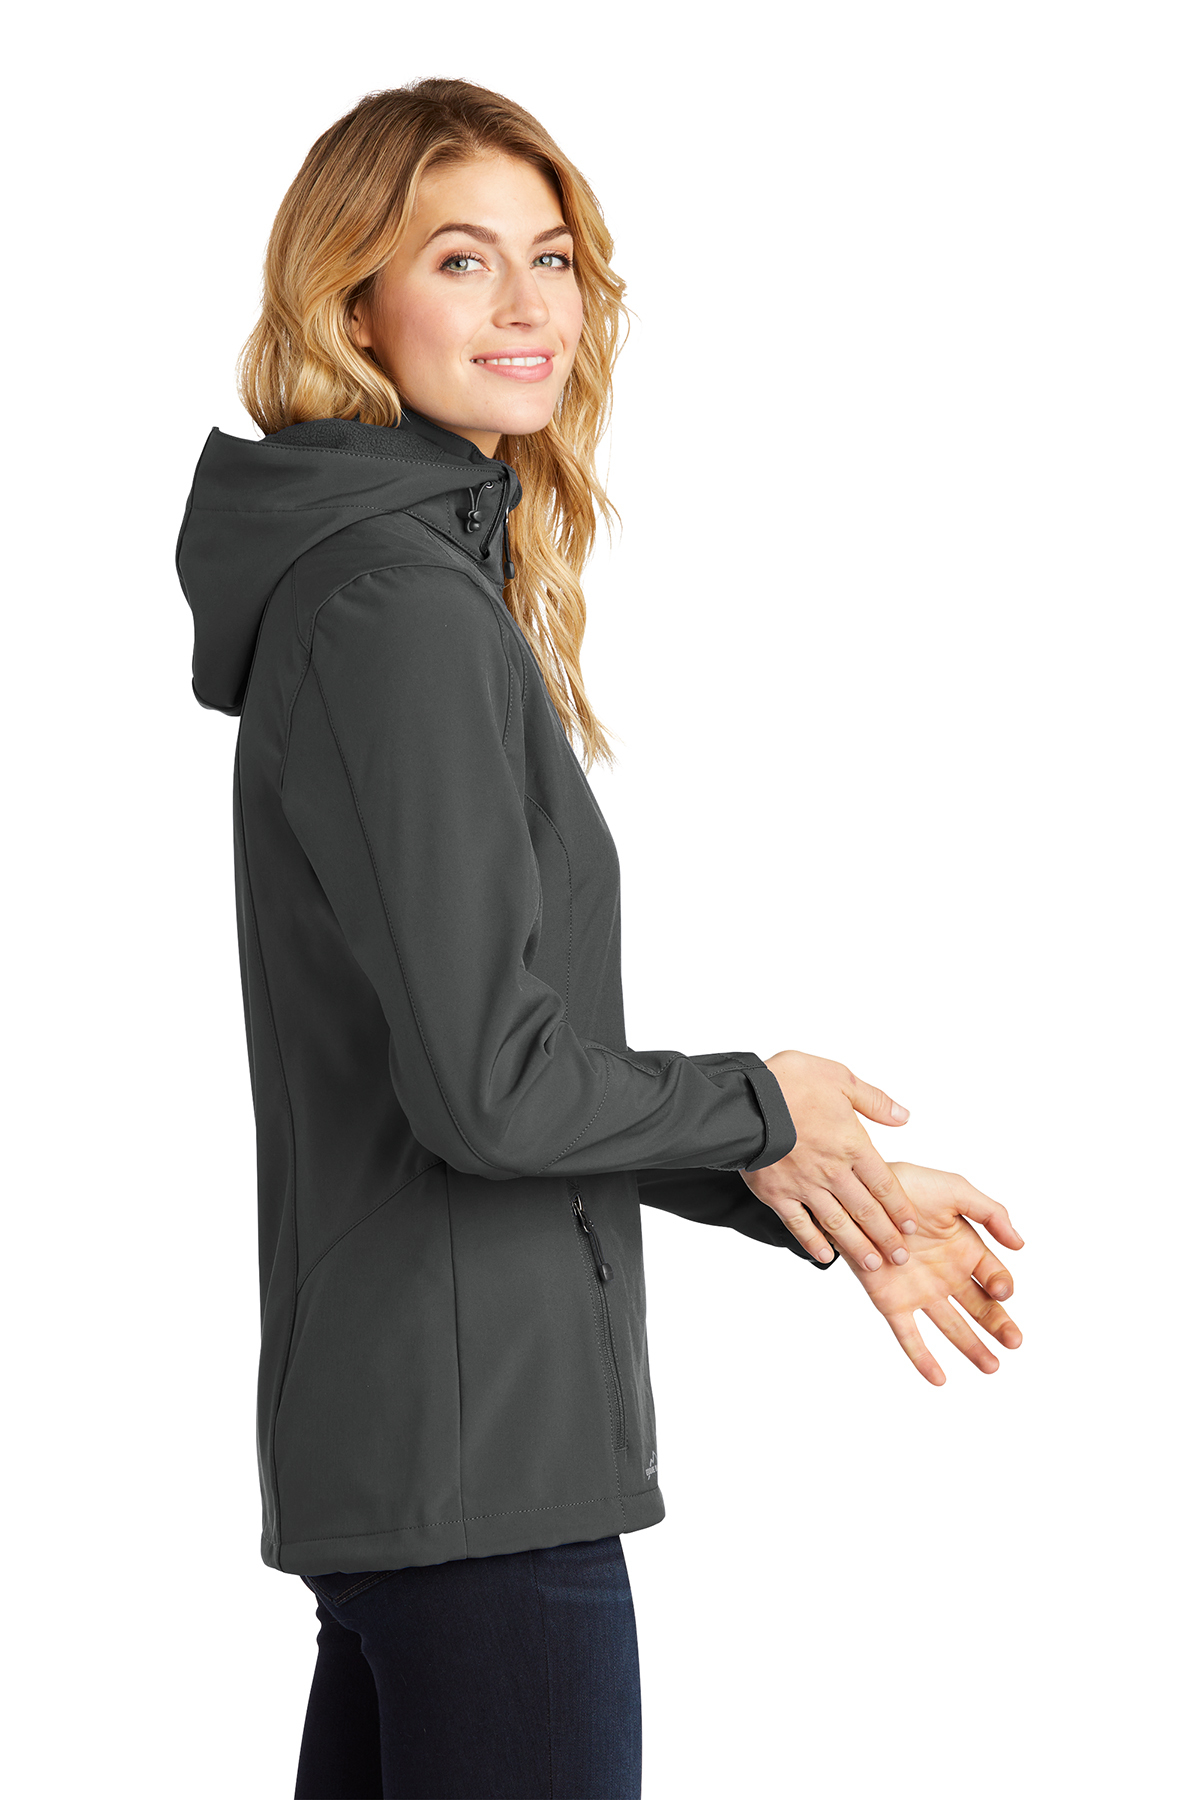 Eddie Bauer Ladies Hooded Shell Parka | Product | Company Casuals